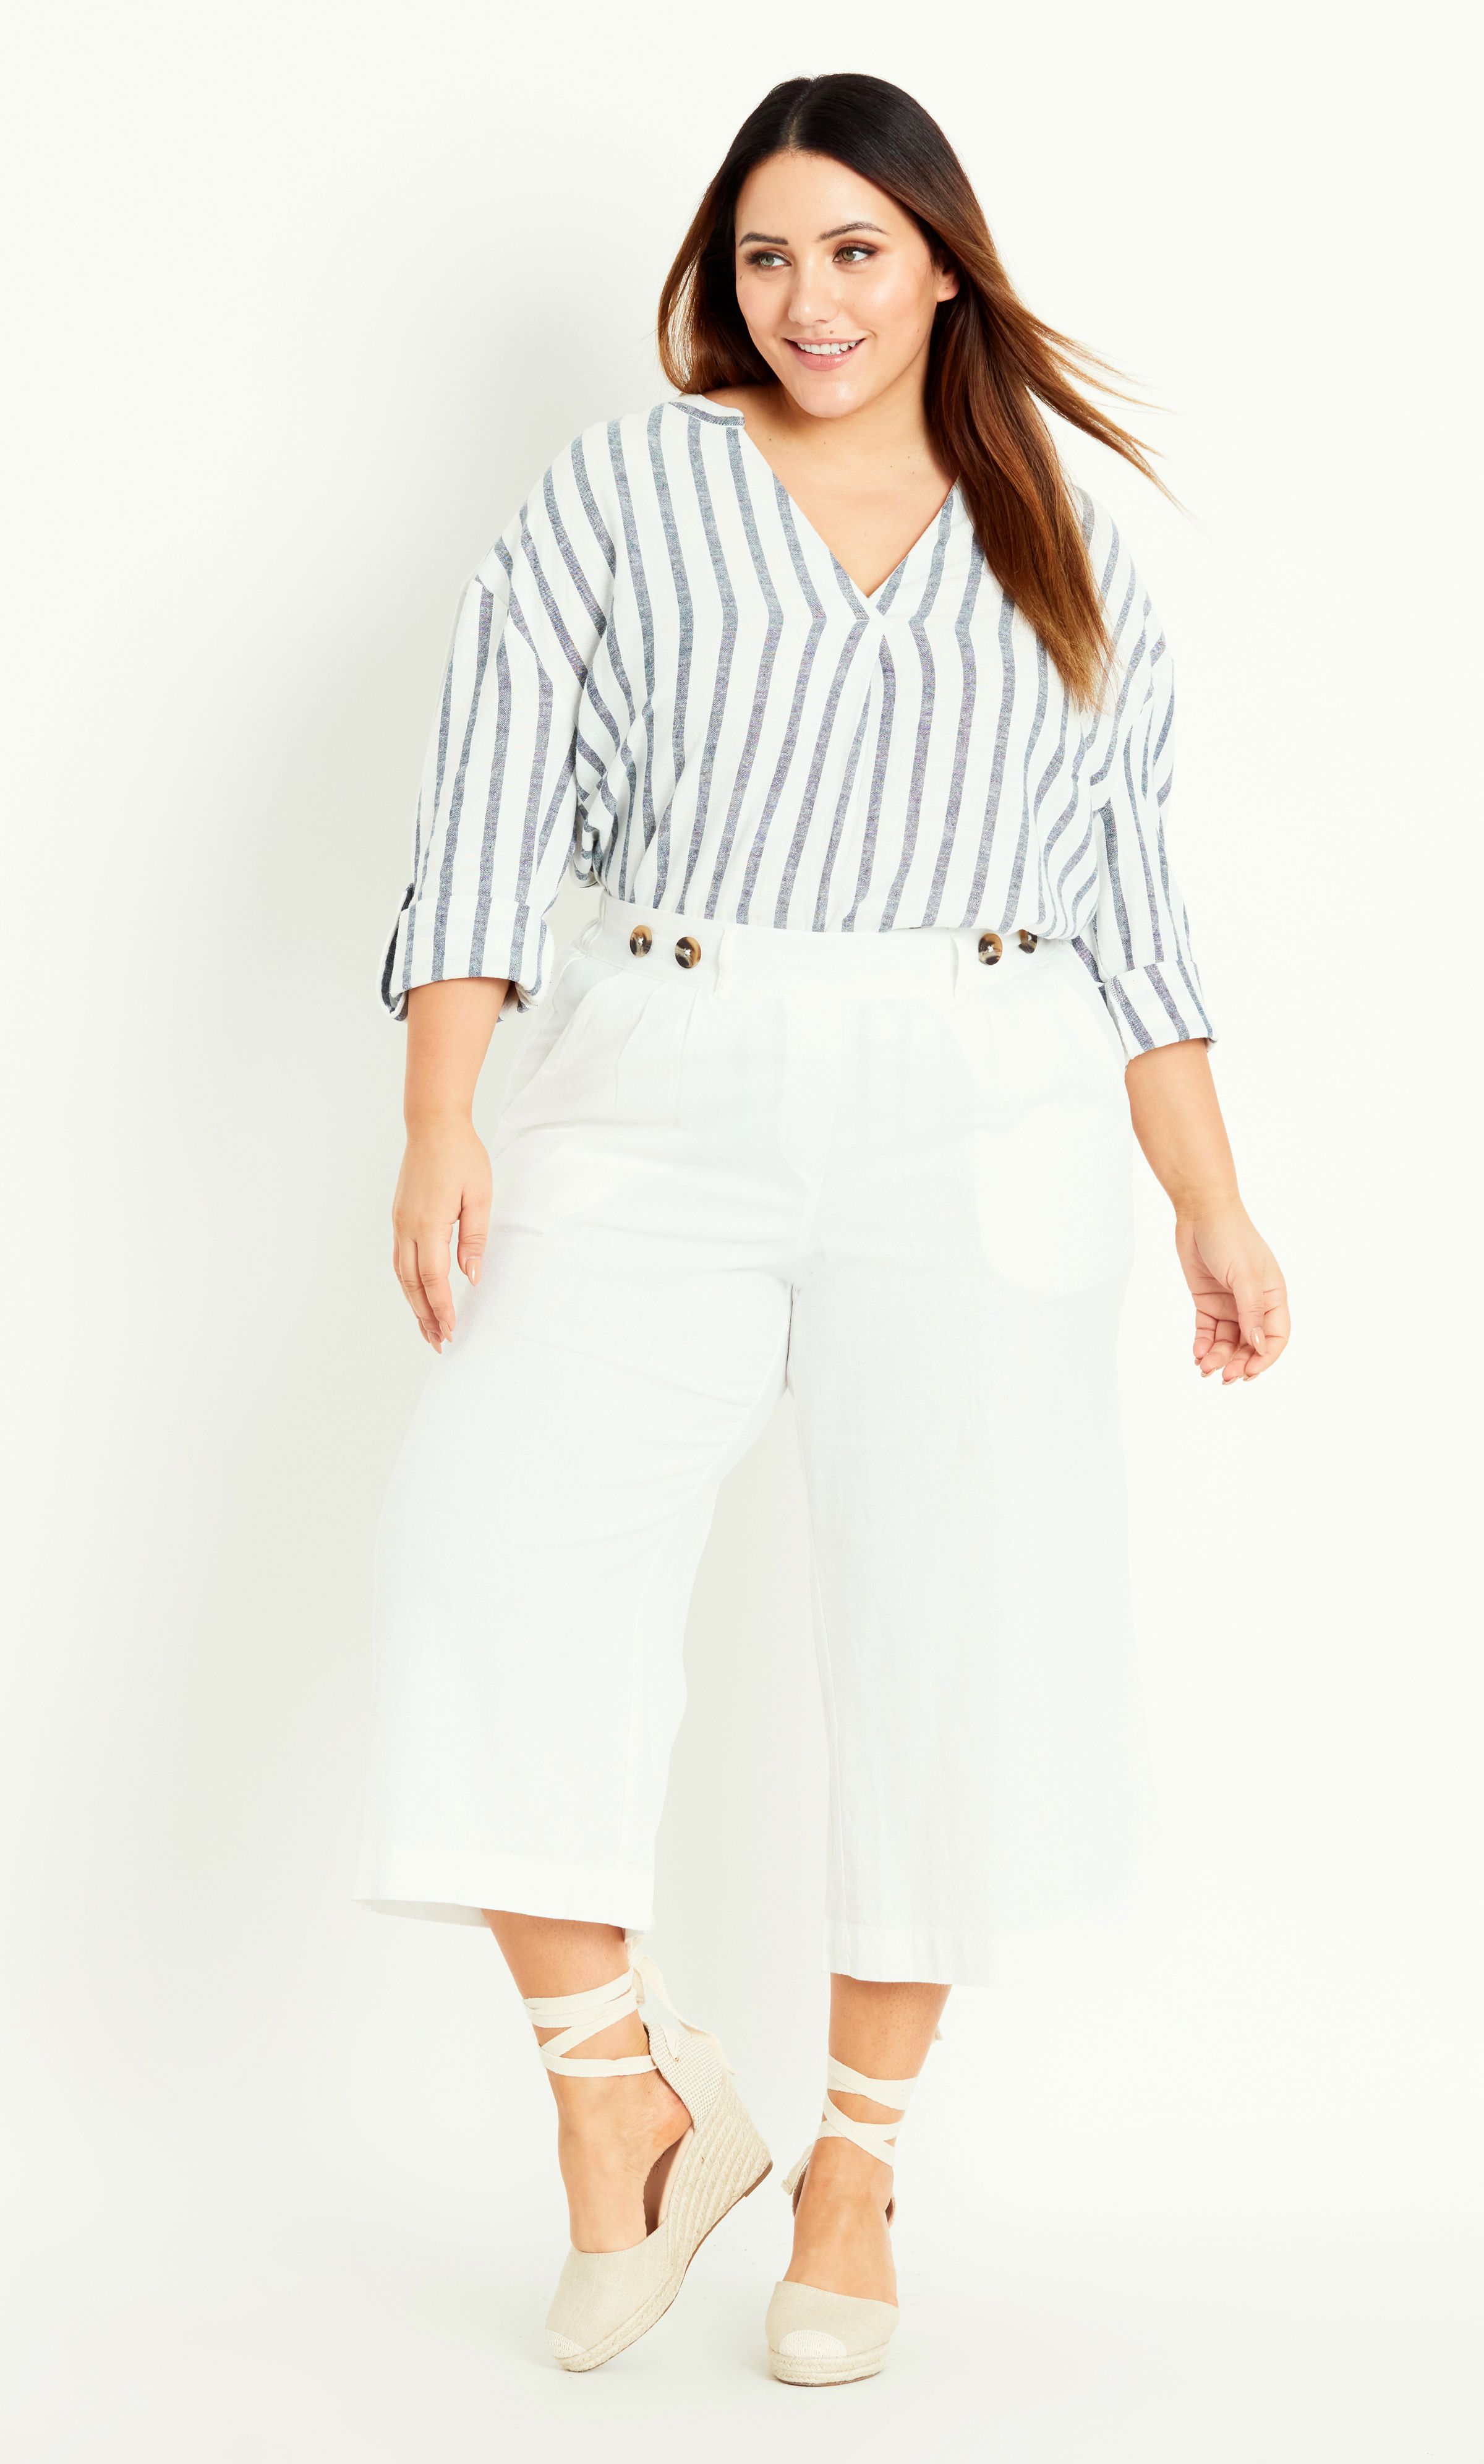 Create an enviable summer look in our white Linen Blend Culotte, channelling dreamy Hamptons vibes with its effortless aesthetic. Offering a convenient elasticated waistband and breathable linen blend fabric, these trousers are as comfortable as they are fashion-forward. Key Features Include: - Elasticated waist with drawstring - Four pockets - Linen blend fabrication - Relaxed leg - Unlined - Pull up style - Ankle length Team with an oversized white shirt and some beige accessories.